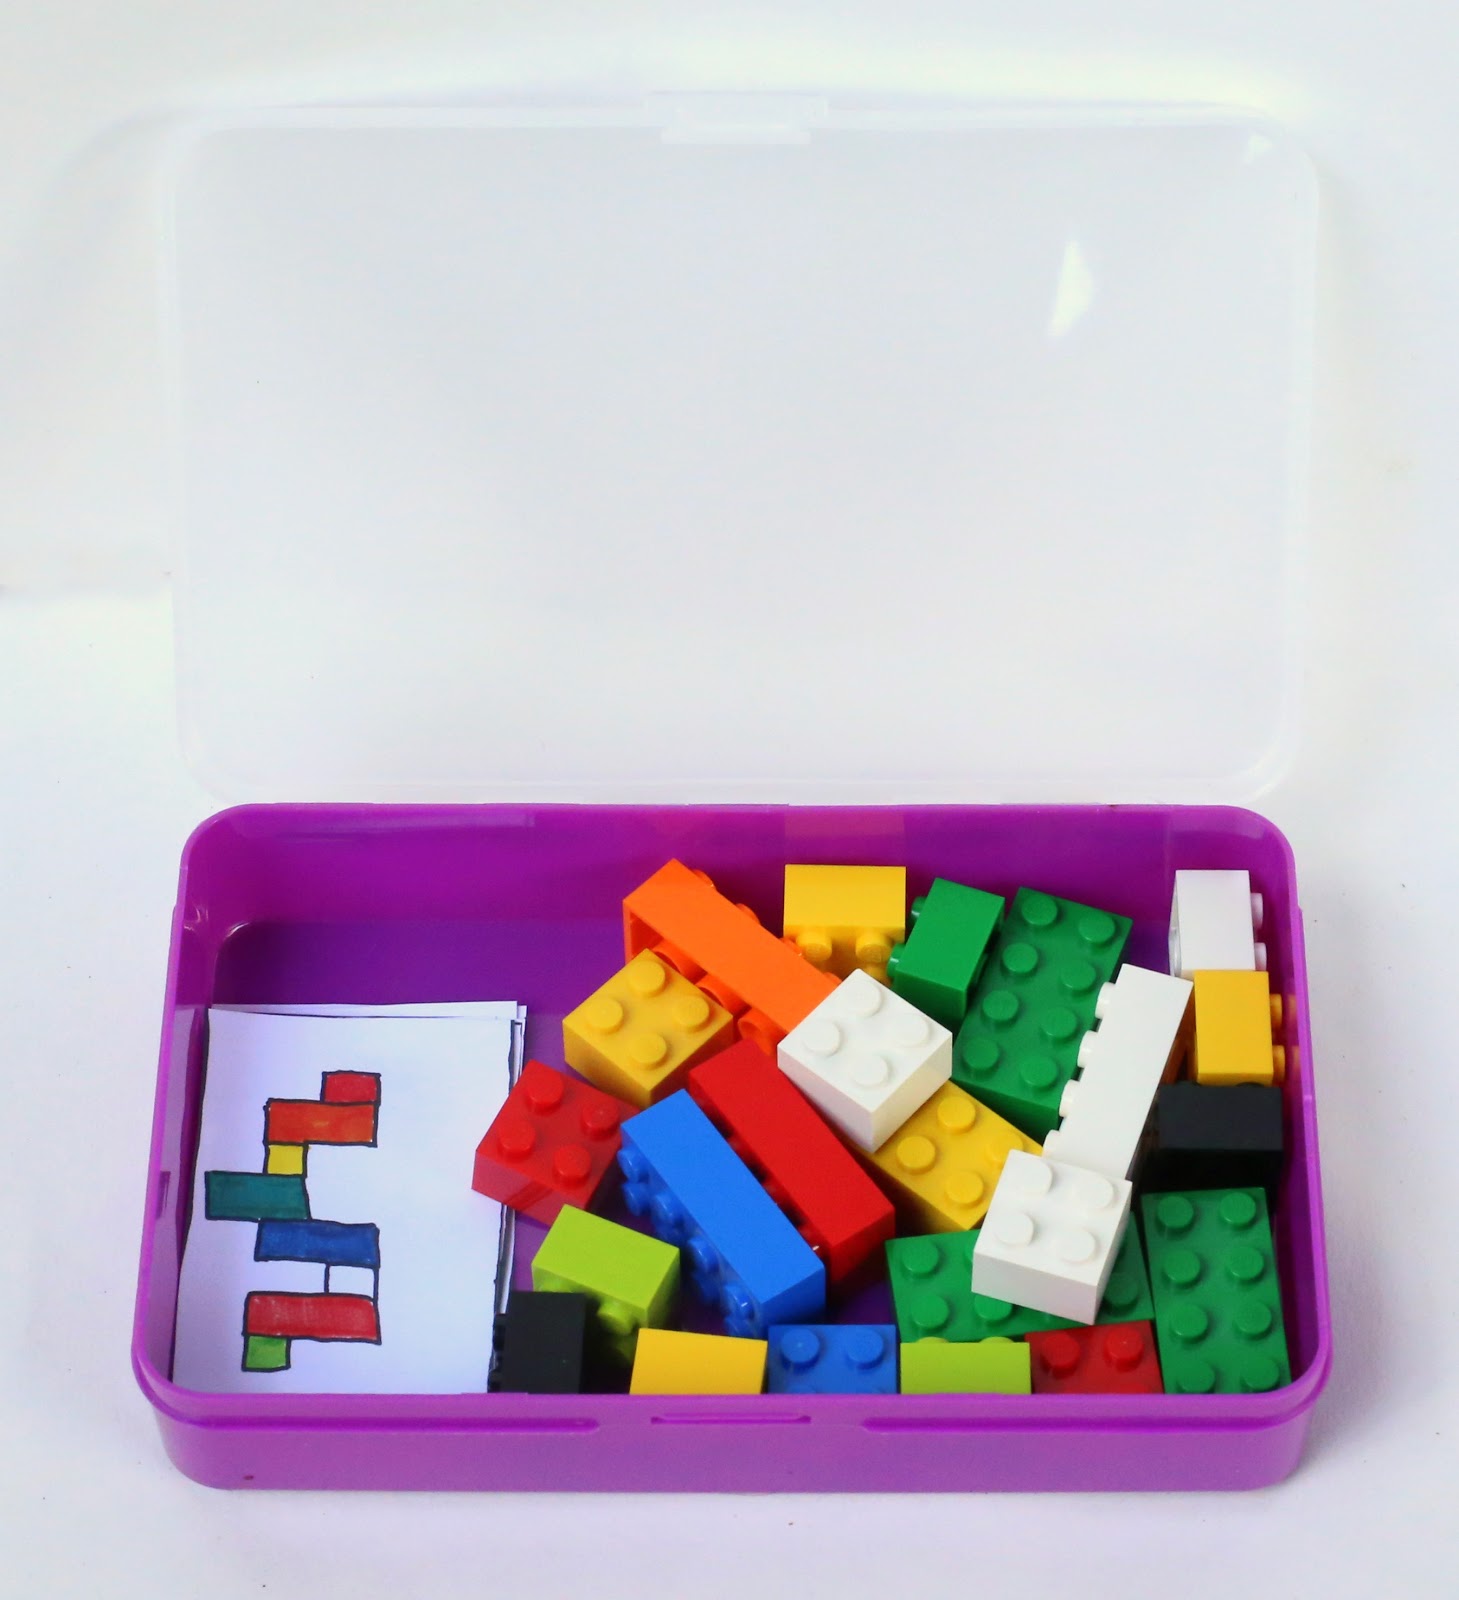 Portable Lego Kit with Activity Cards for Toddler Quiet Time 